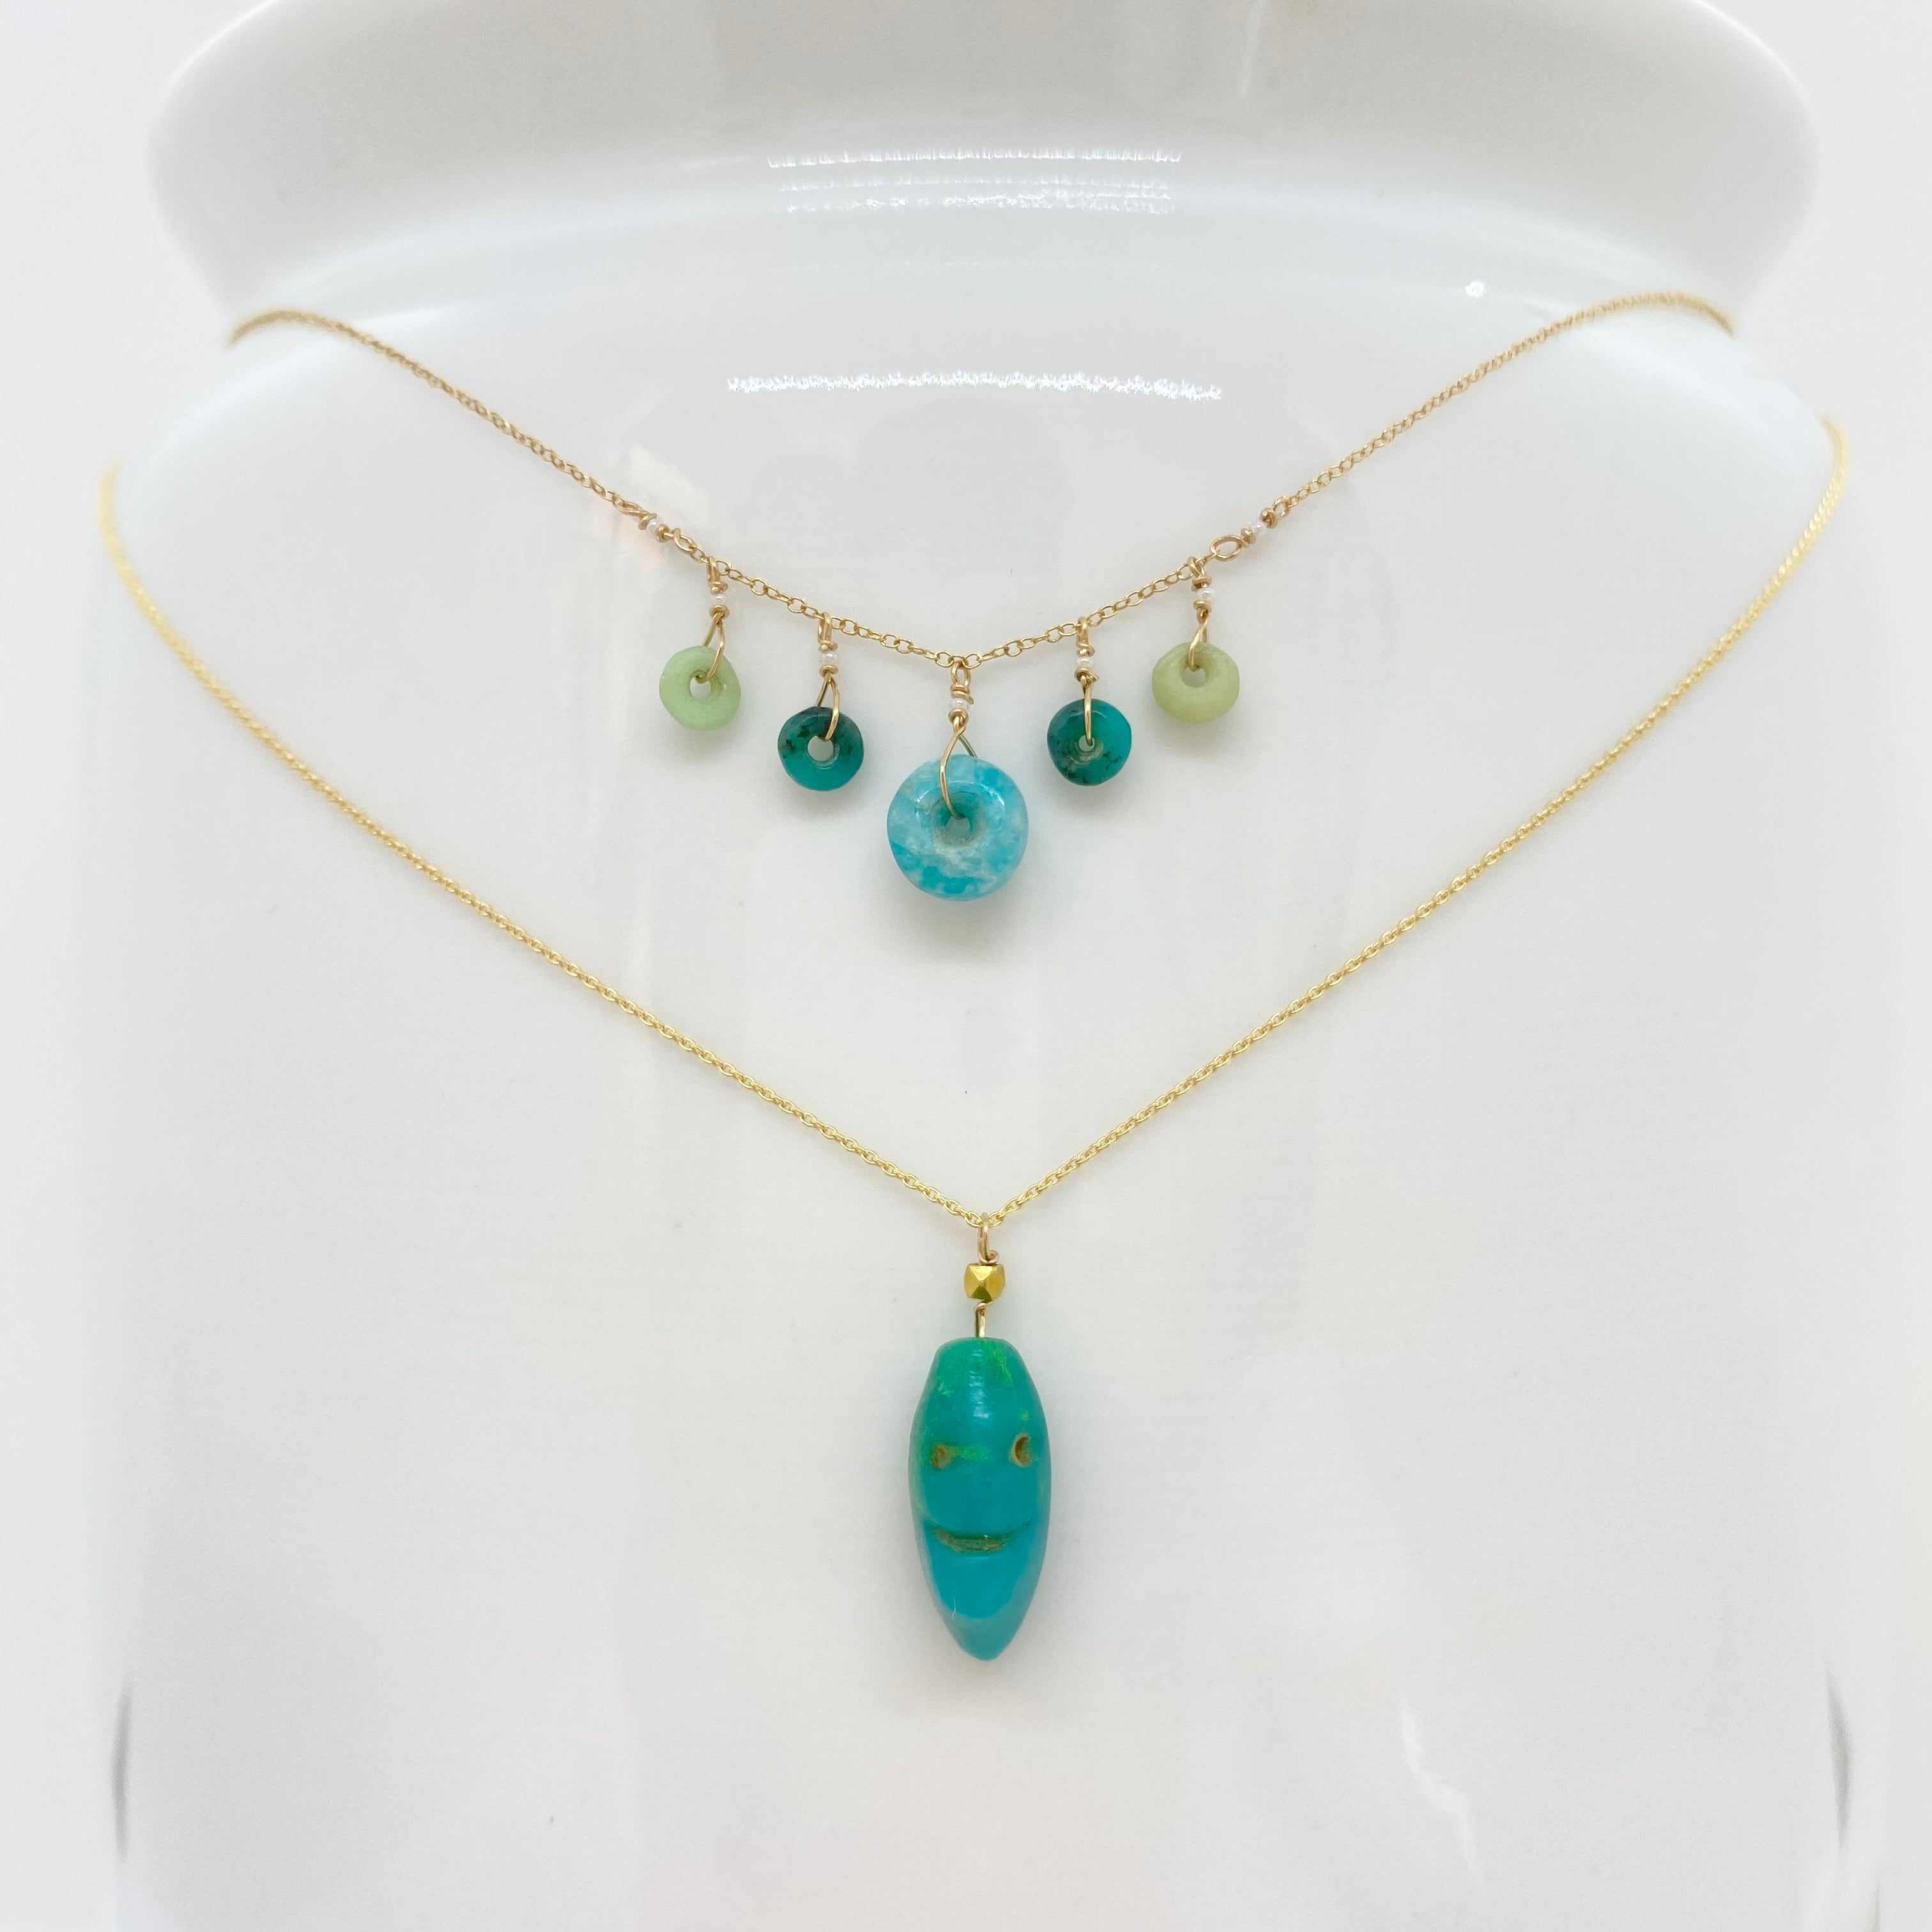 14k Gold Chain Necklace w/ Pre-Columbian Chrysoprase, 18k Gold Nugget & Antique Italian Beads